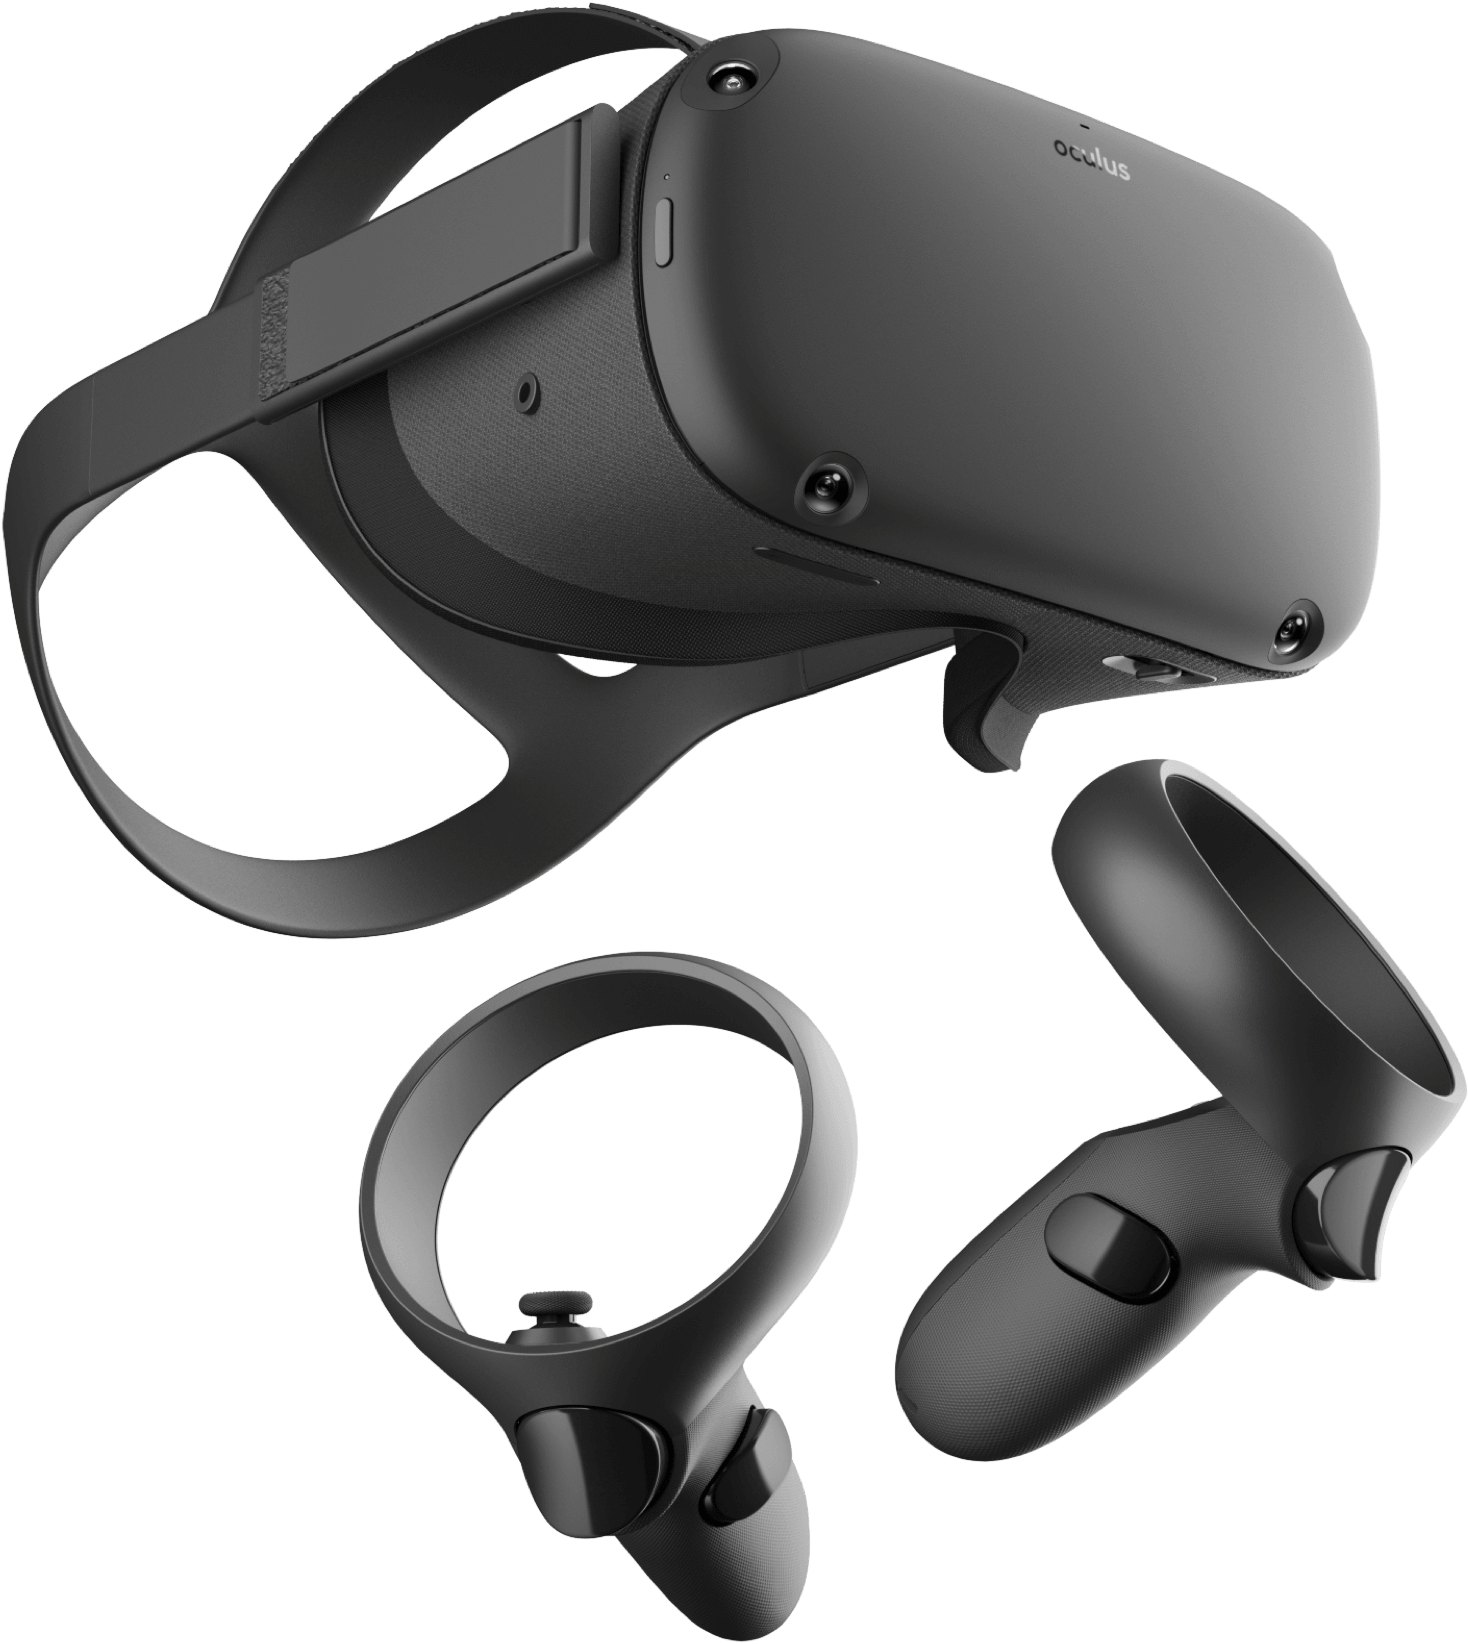 Oculus Quest Is The Biggest Vr Innovation Yet New Oculus Virtual